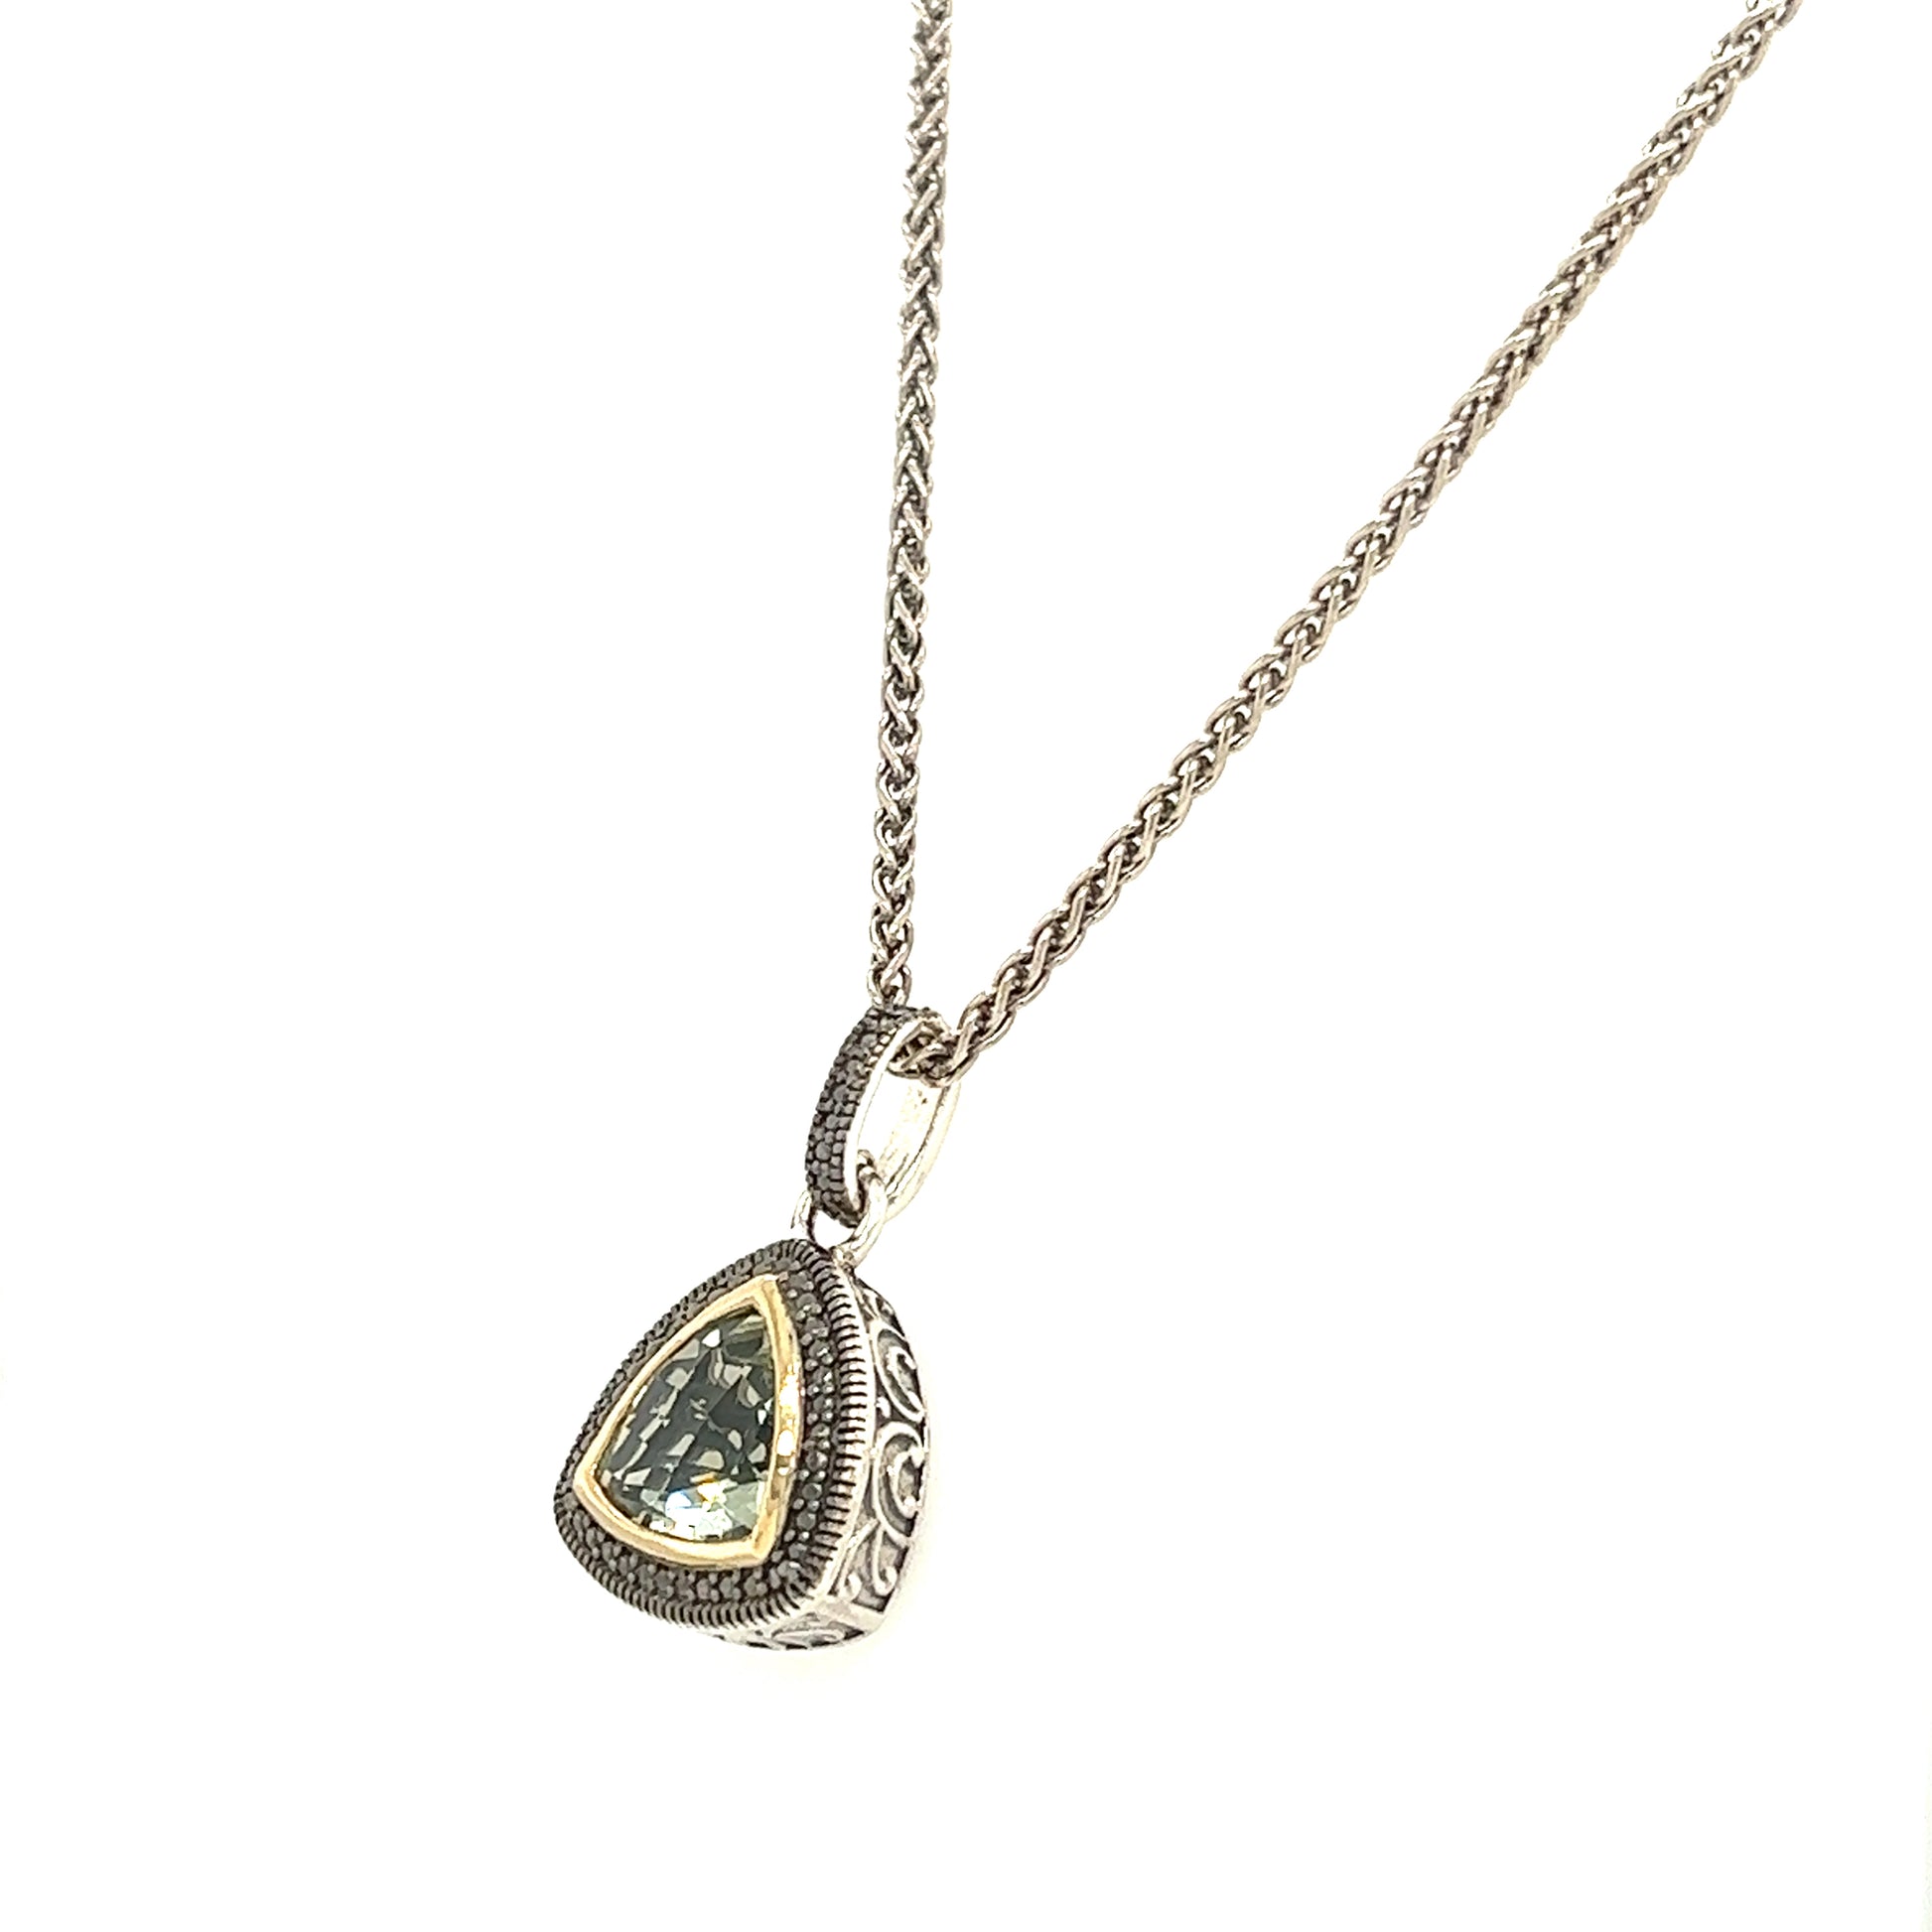 Trillion Green Quartz Antiqued Necklace with 14K Yellow Gold Accent in Sterling Silver Right Side View